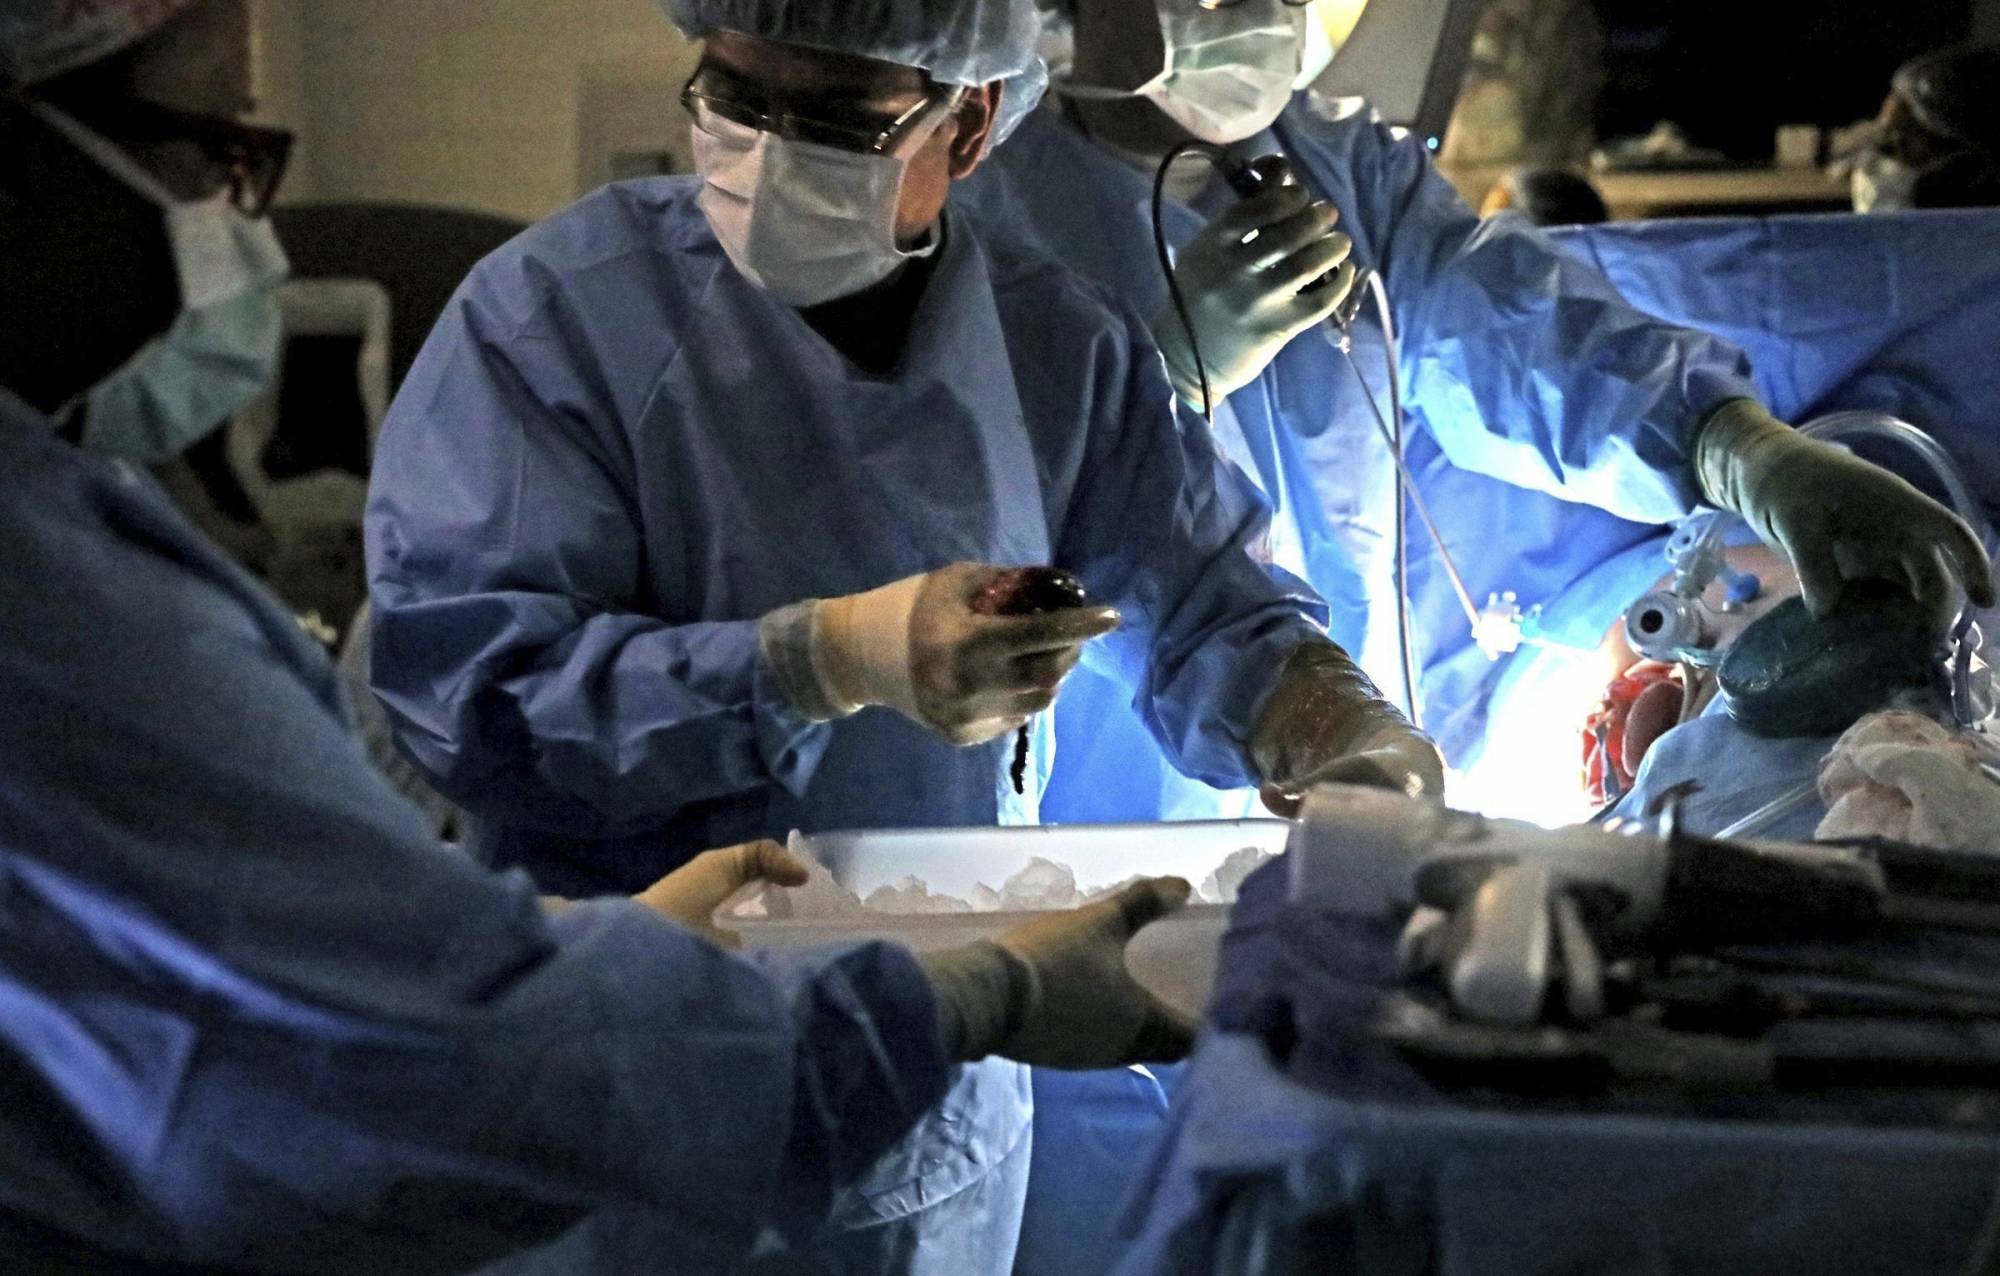 FILE- In this Jan. 17, 2018, file photo, SLUCare transplant surgeon Dr. Chintalapati Varma physically grabs the kidney from the body of living organ donor Robyn Rosenberger during surgery at SSM Health Saint Louis University Hospital in St. Louis. British researchers reported Monday, Jan. 29, that living kidney donors are more likely to develop later kidney failure than non-donors, and female donors may experience a pregnancy complication, problematic high blood pressure (Laurie Skrivan/St. Louis Post-Dispatch via AP, File)